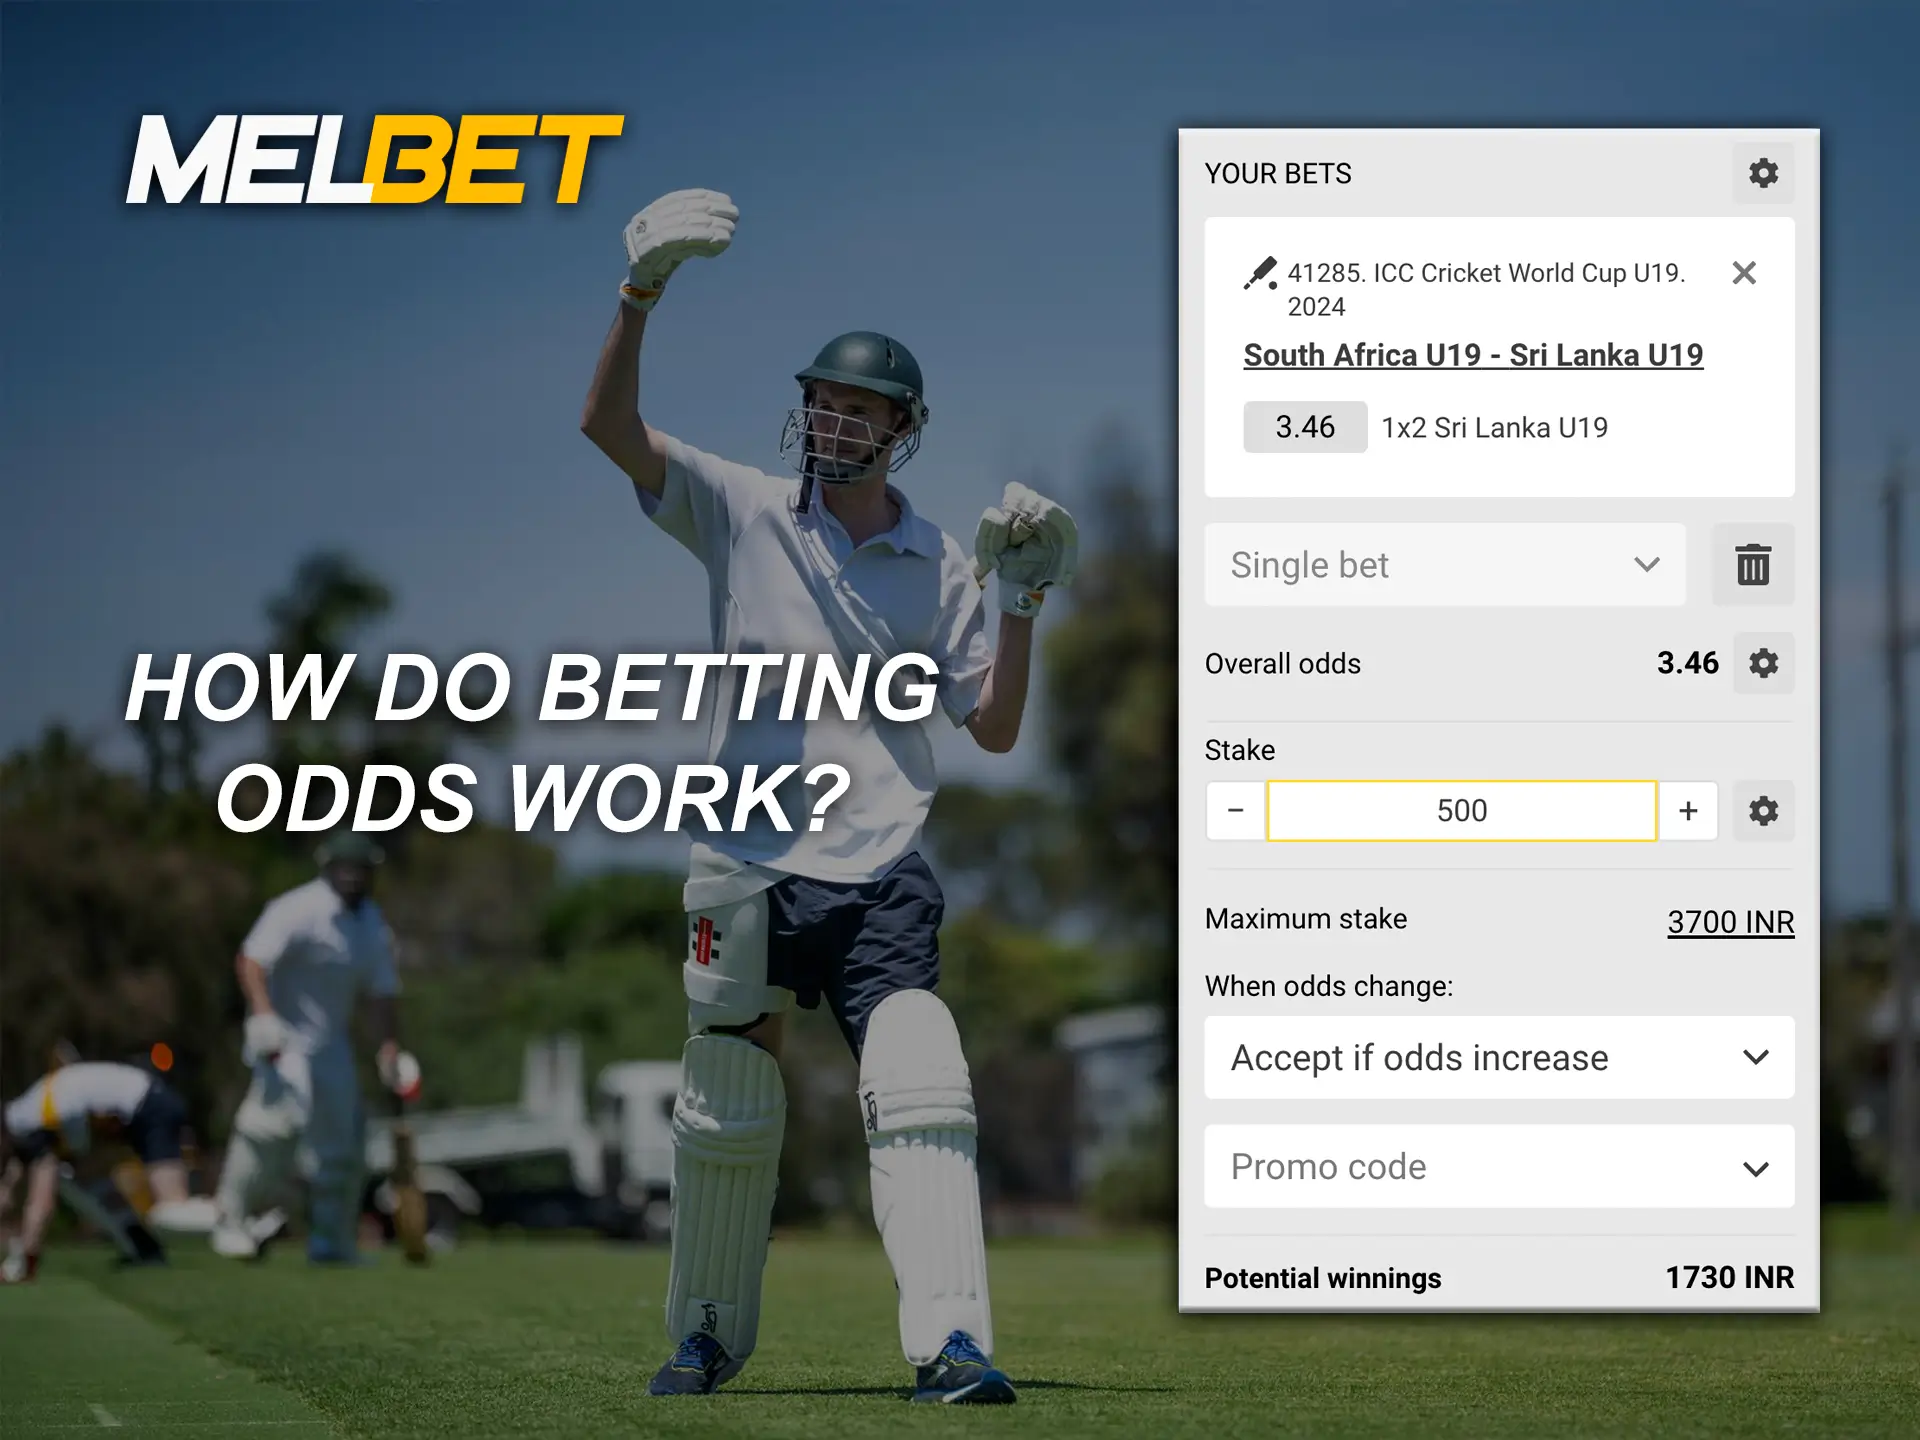 Study the odds presented on the Melbet website and place your bets wisely.